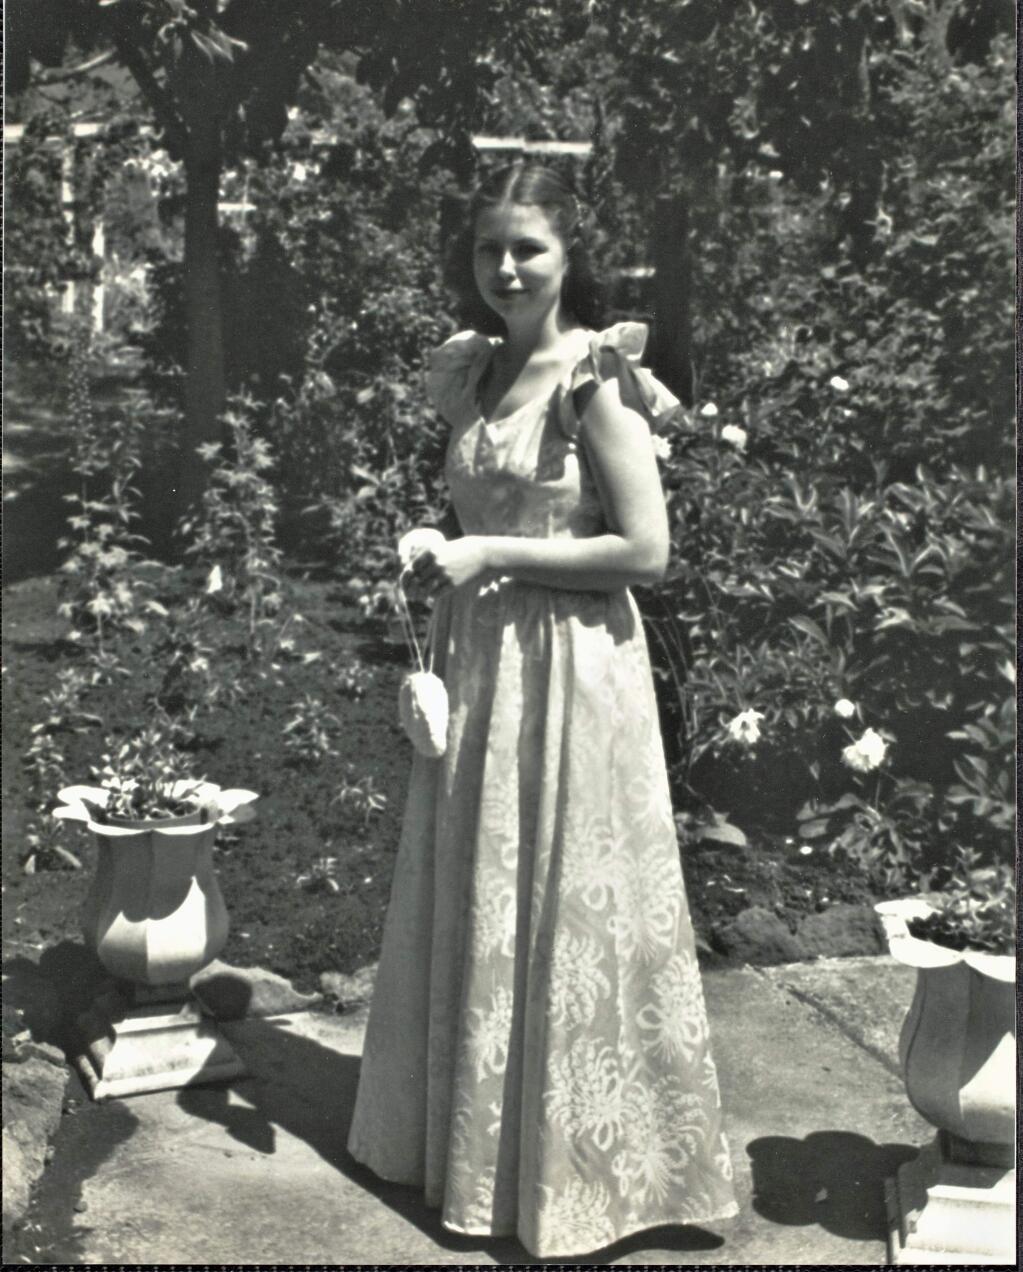 An unidentified girl poses in a garden wearing a long dress for a formal dance in 1946. (Courtesy of the Sonoma County Library)